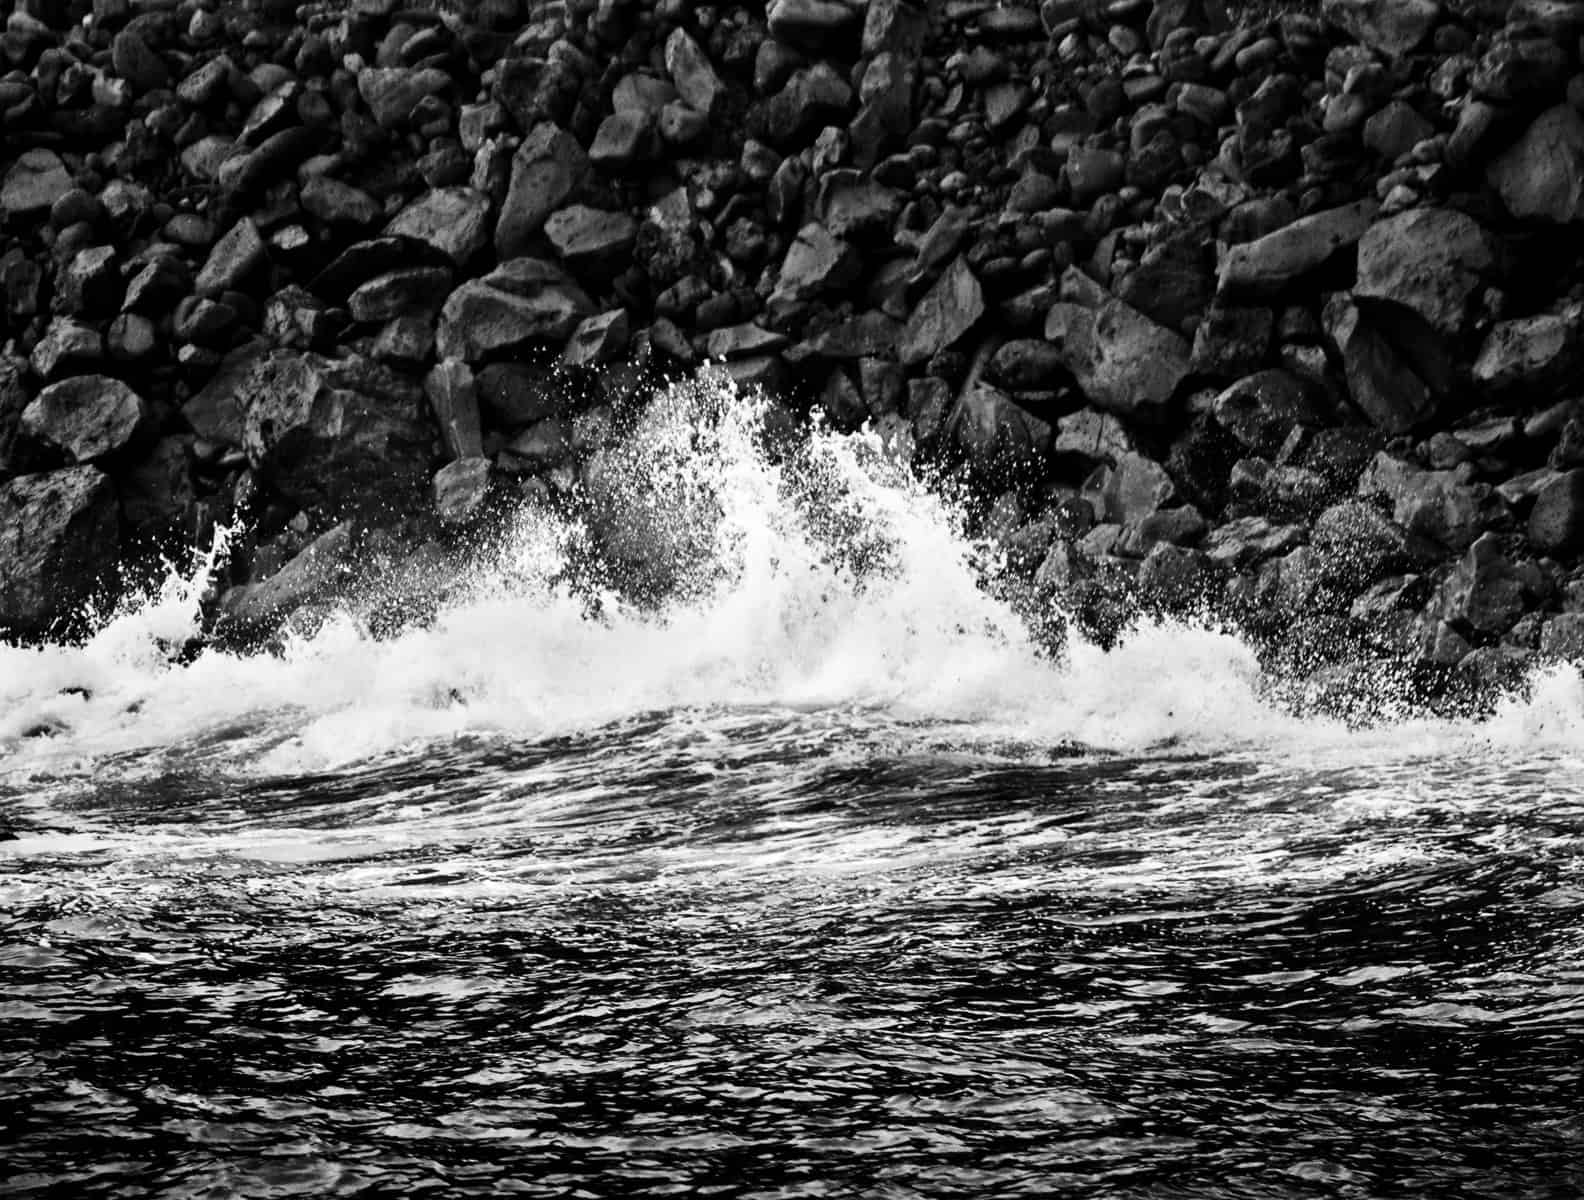 La Palma, Canary Islands. I’ve long been fascinated by what I call ‘interfaces’ - where the natural world meets the Man-made. The seawall here was not very attractive, but I saw potential in the shapes the breaking waves were making. I used a 70-200…